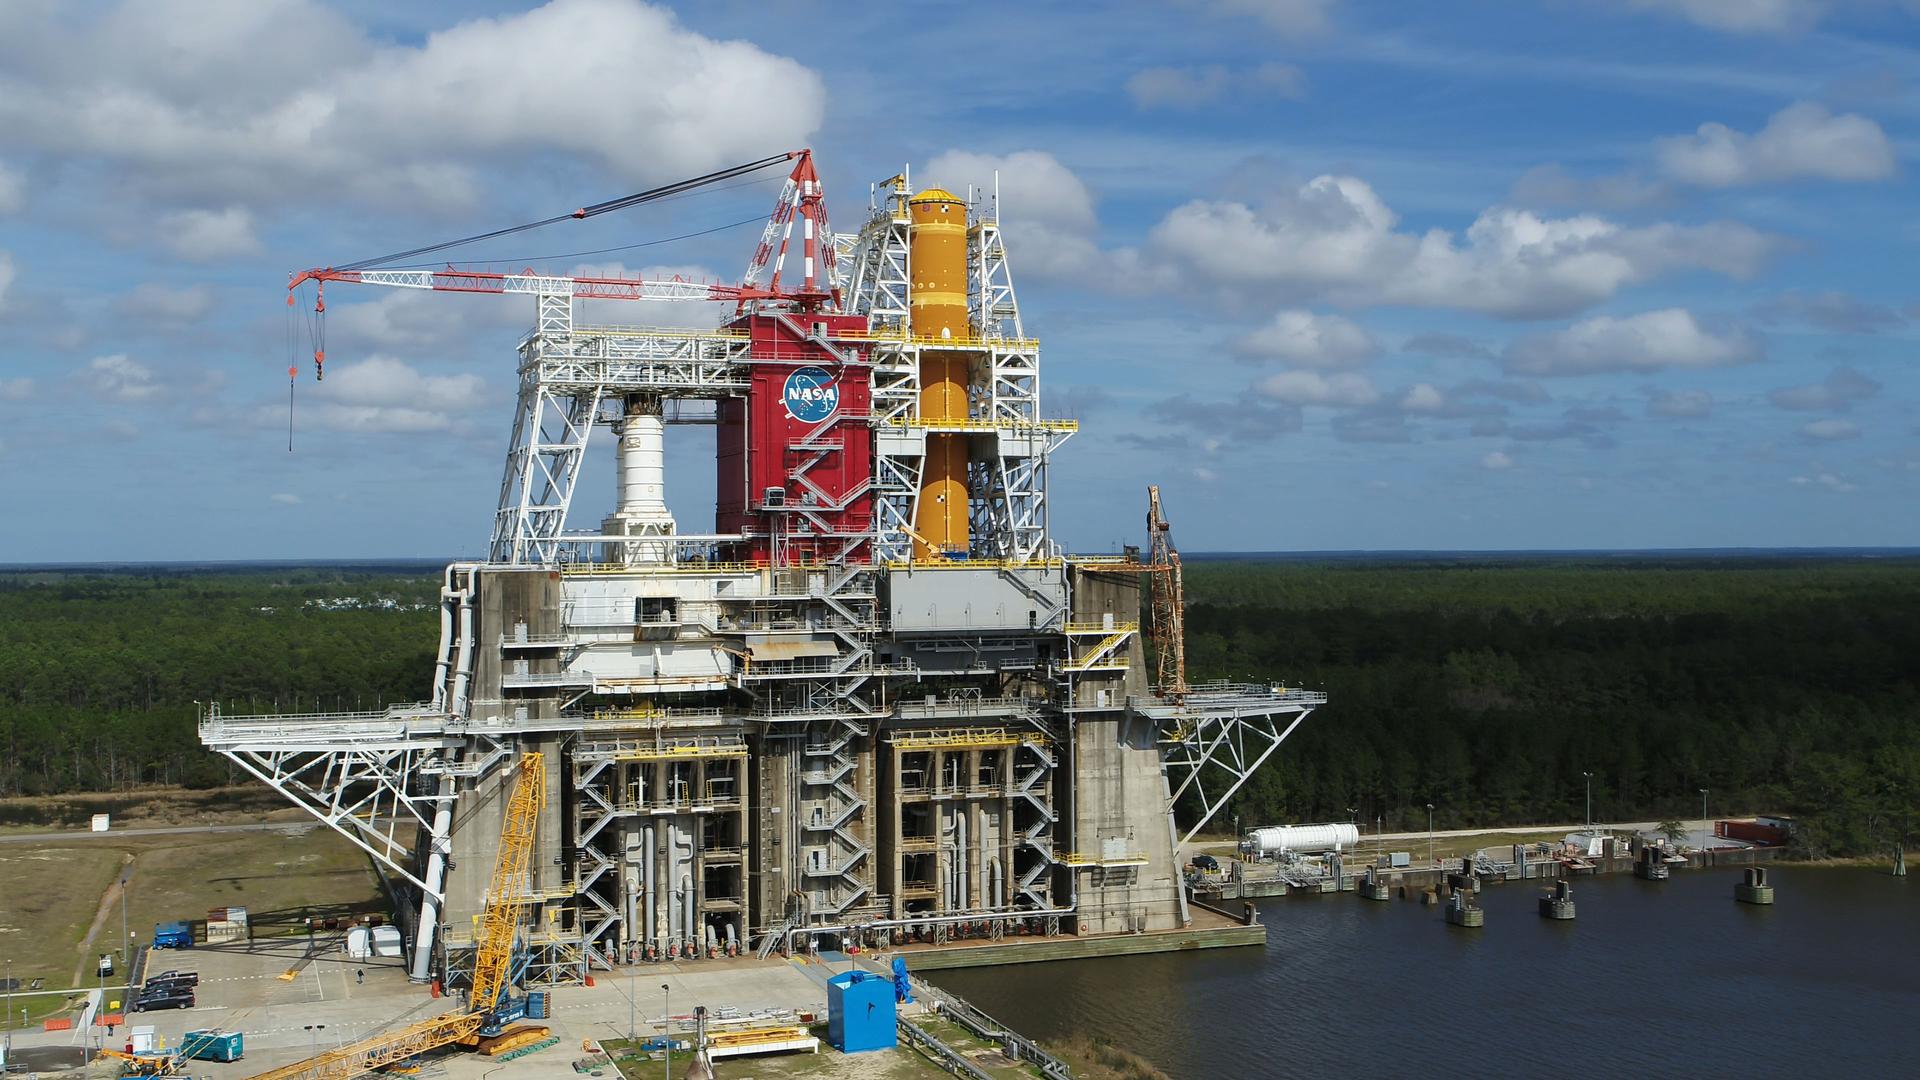 A NASA drone photo offers a bird’s-eye view of the B-2 Test Stand at NASA’s Stennis Space Center